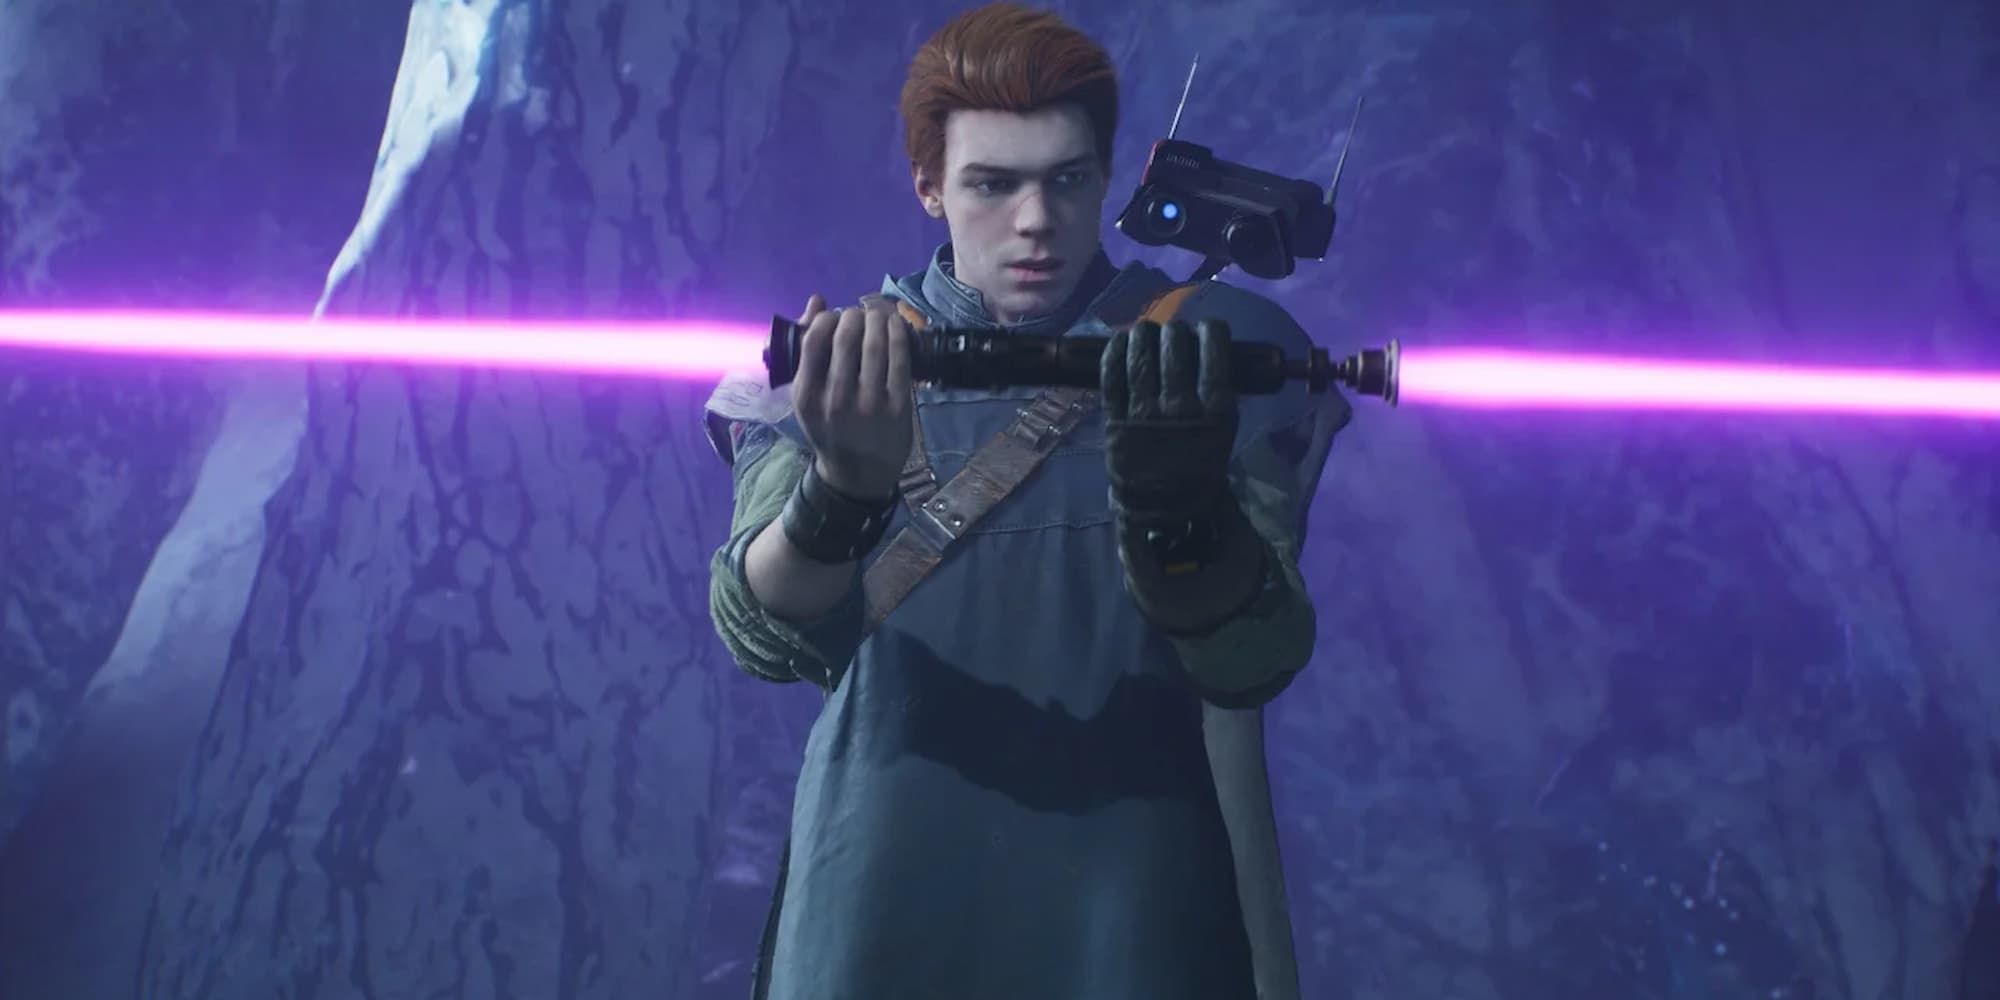 Cal Kestis takes a look at the double-bladed magenta lightsaber in Star Wars Jedi: Fallen Order.